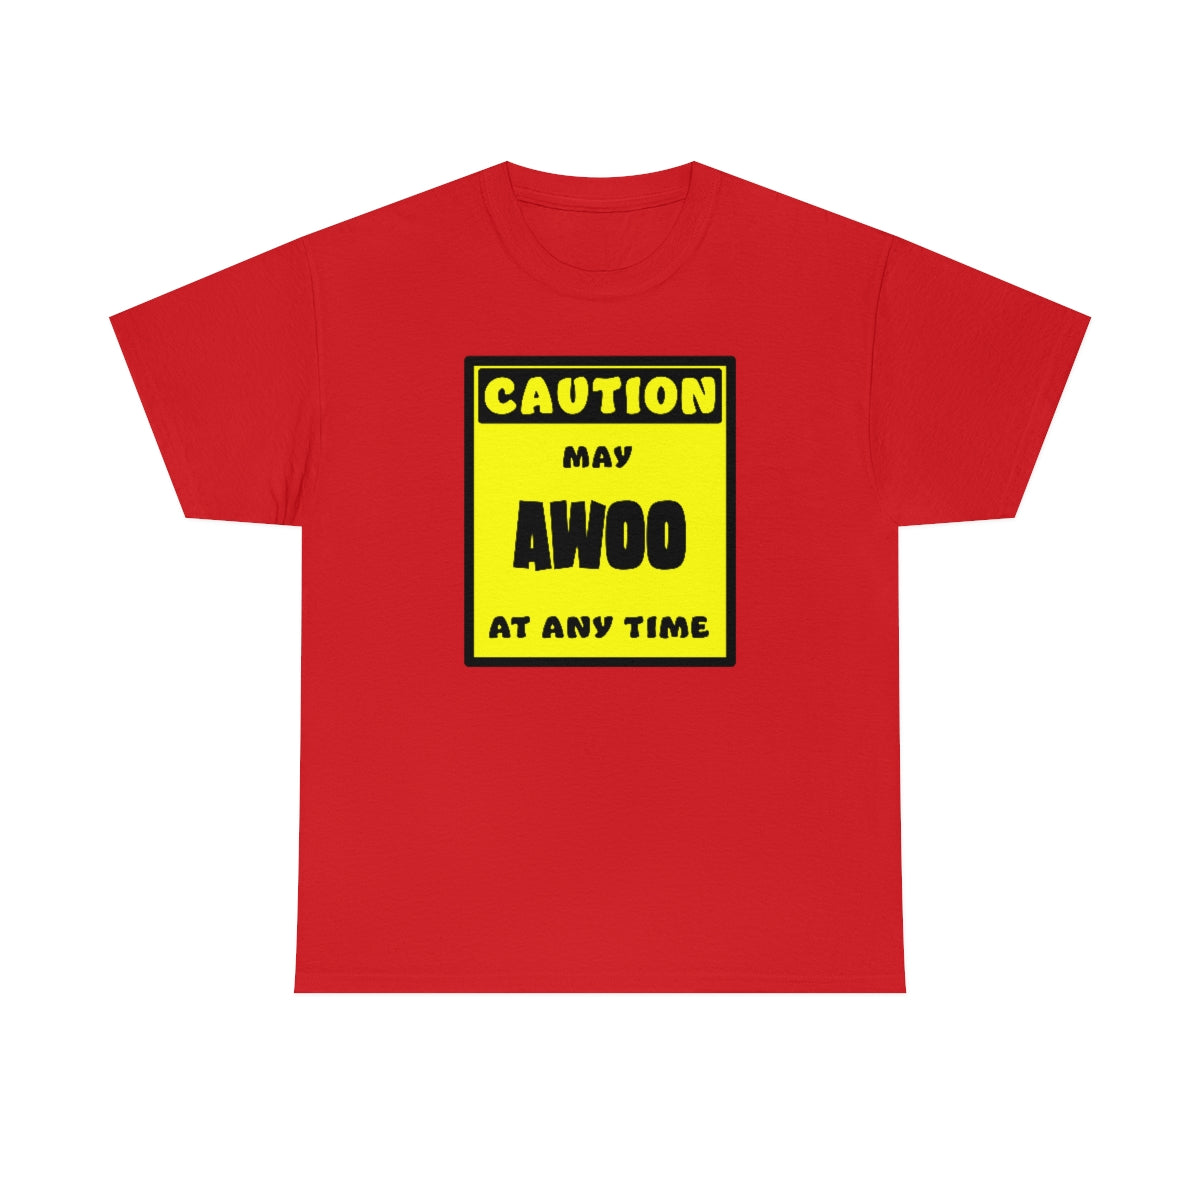 CAUTION! May AWOO at any time! - T-Shirt T-Shirt AFLT-Whootorca Red S 